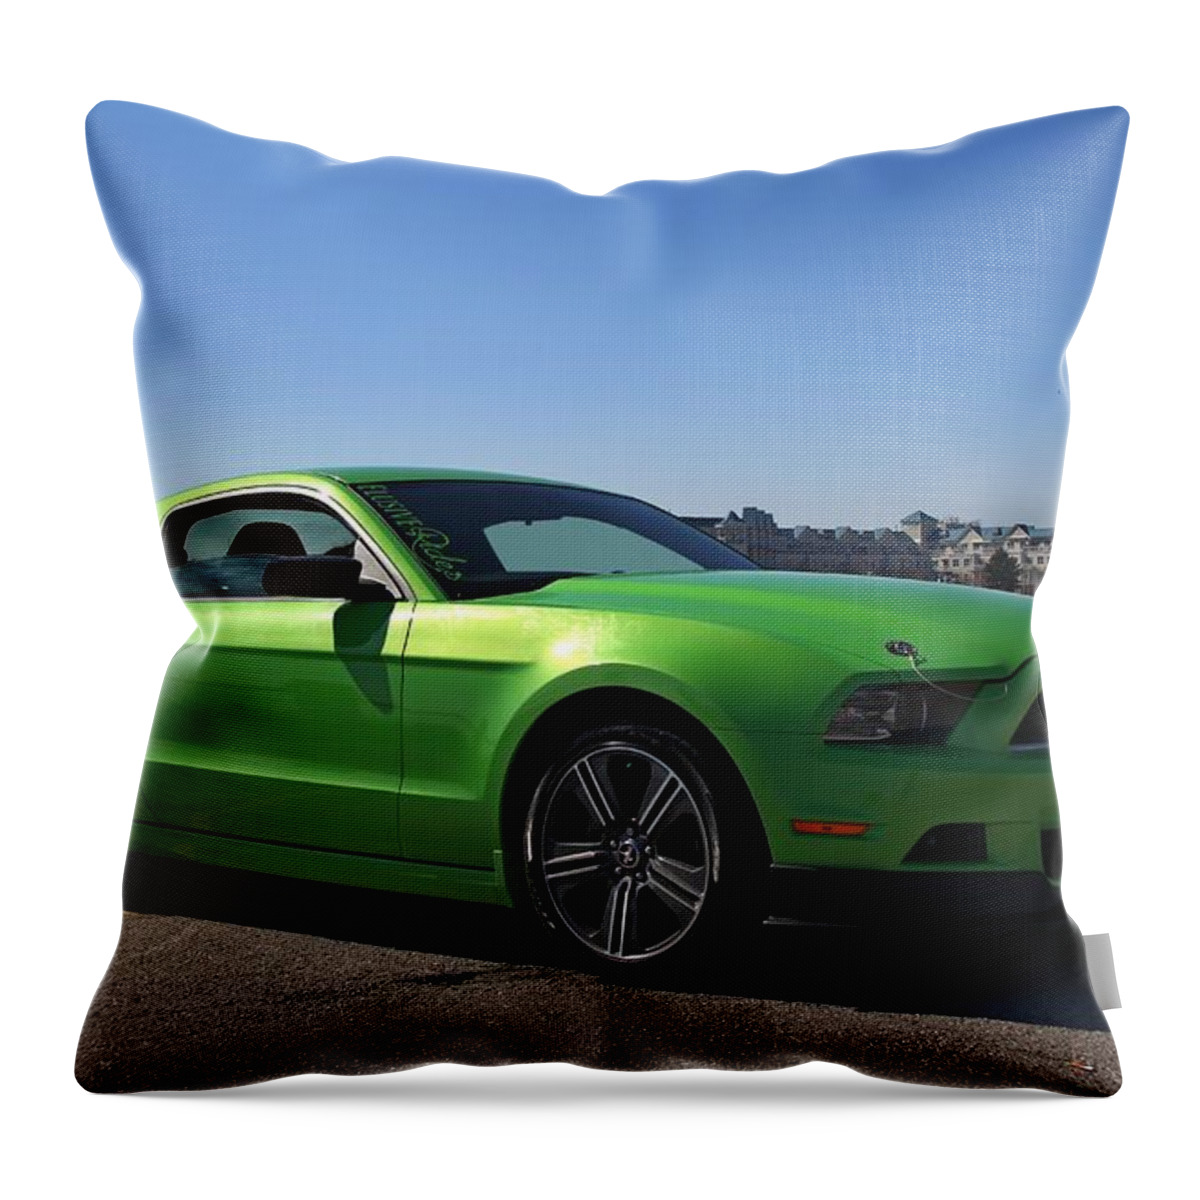 Transportation Throw Pillow featuring the photograph Green Mustang by Davandra Cribbie